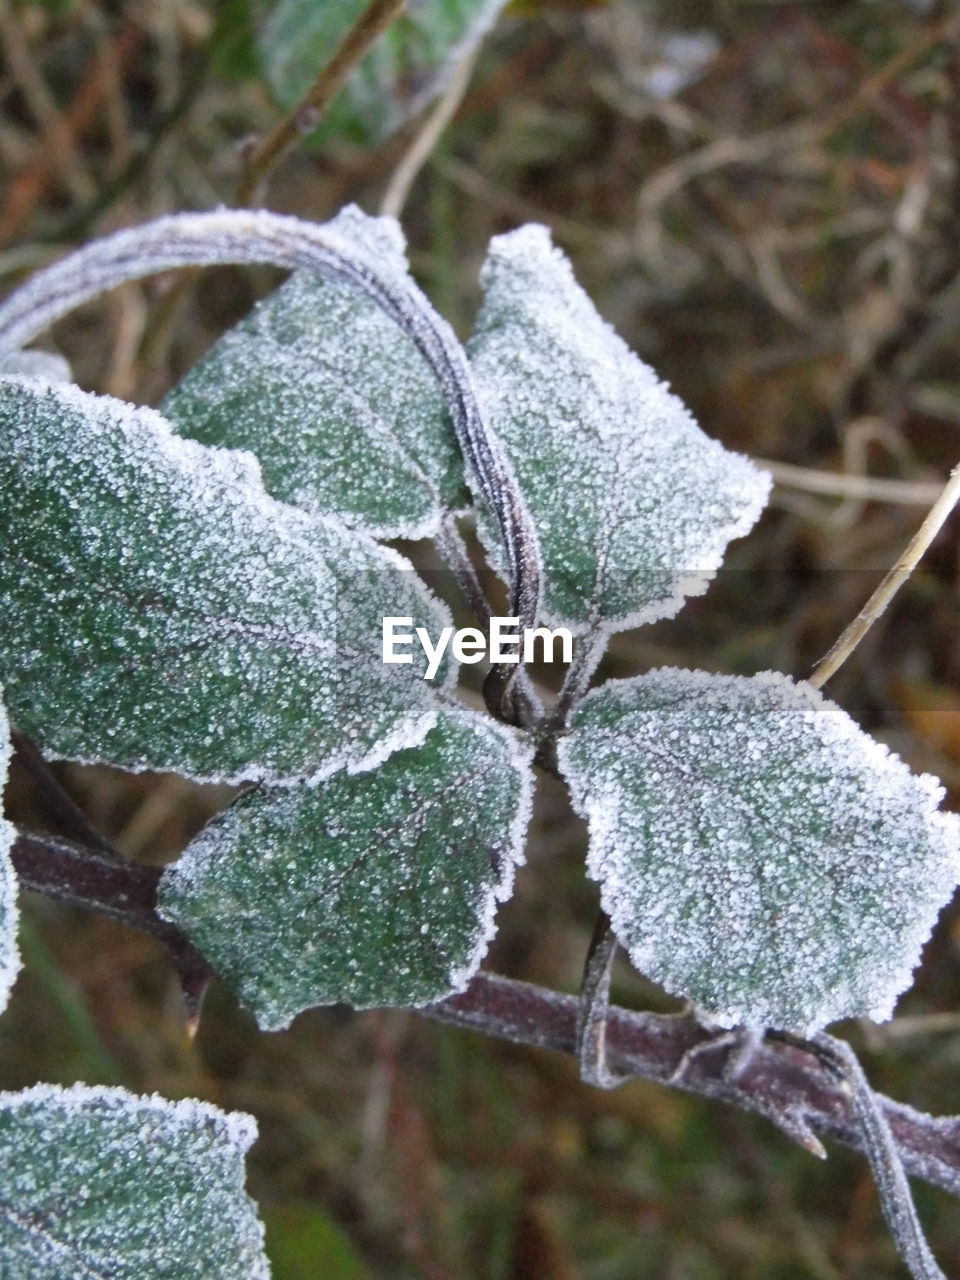 CLOSE-UP OF ICE ON PLANT